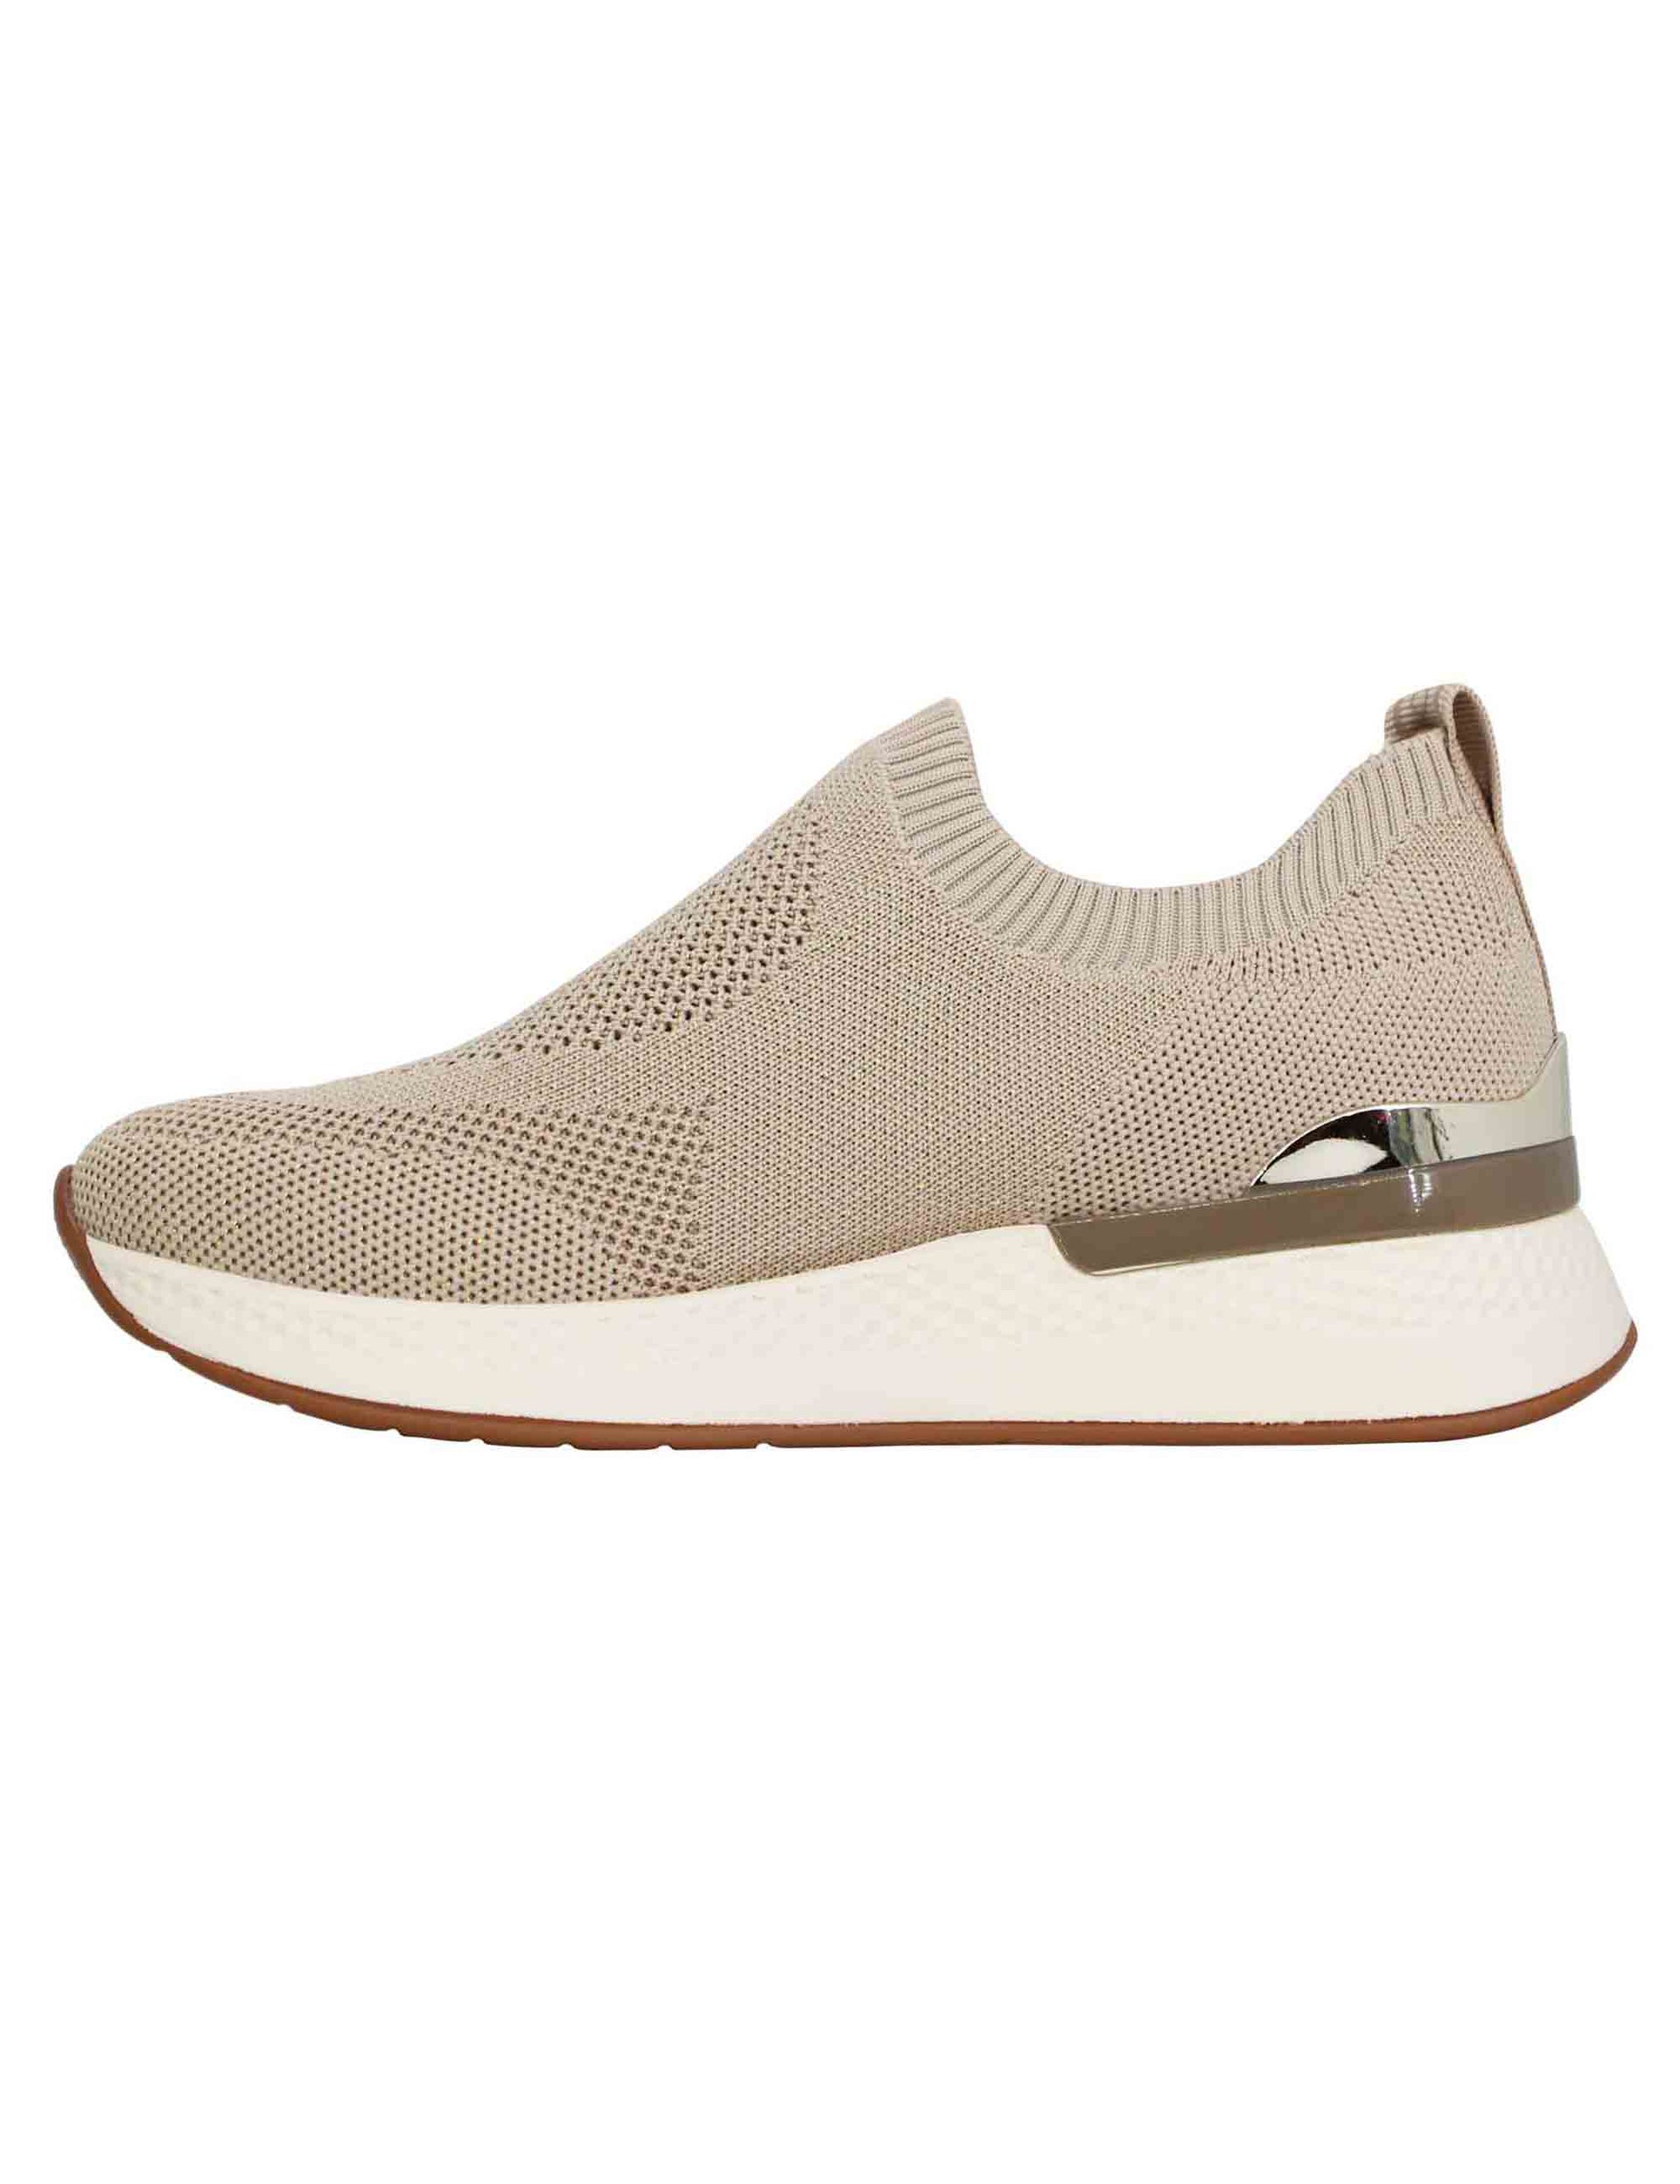 Women's sneakers in taupe stretch fabric with high rubber sole